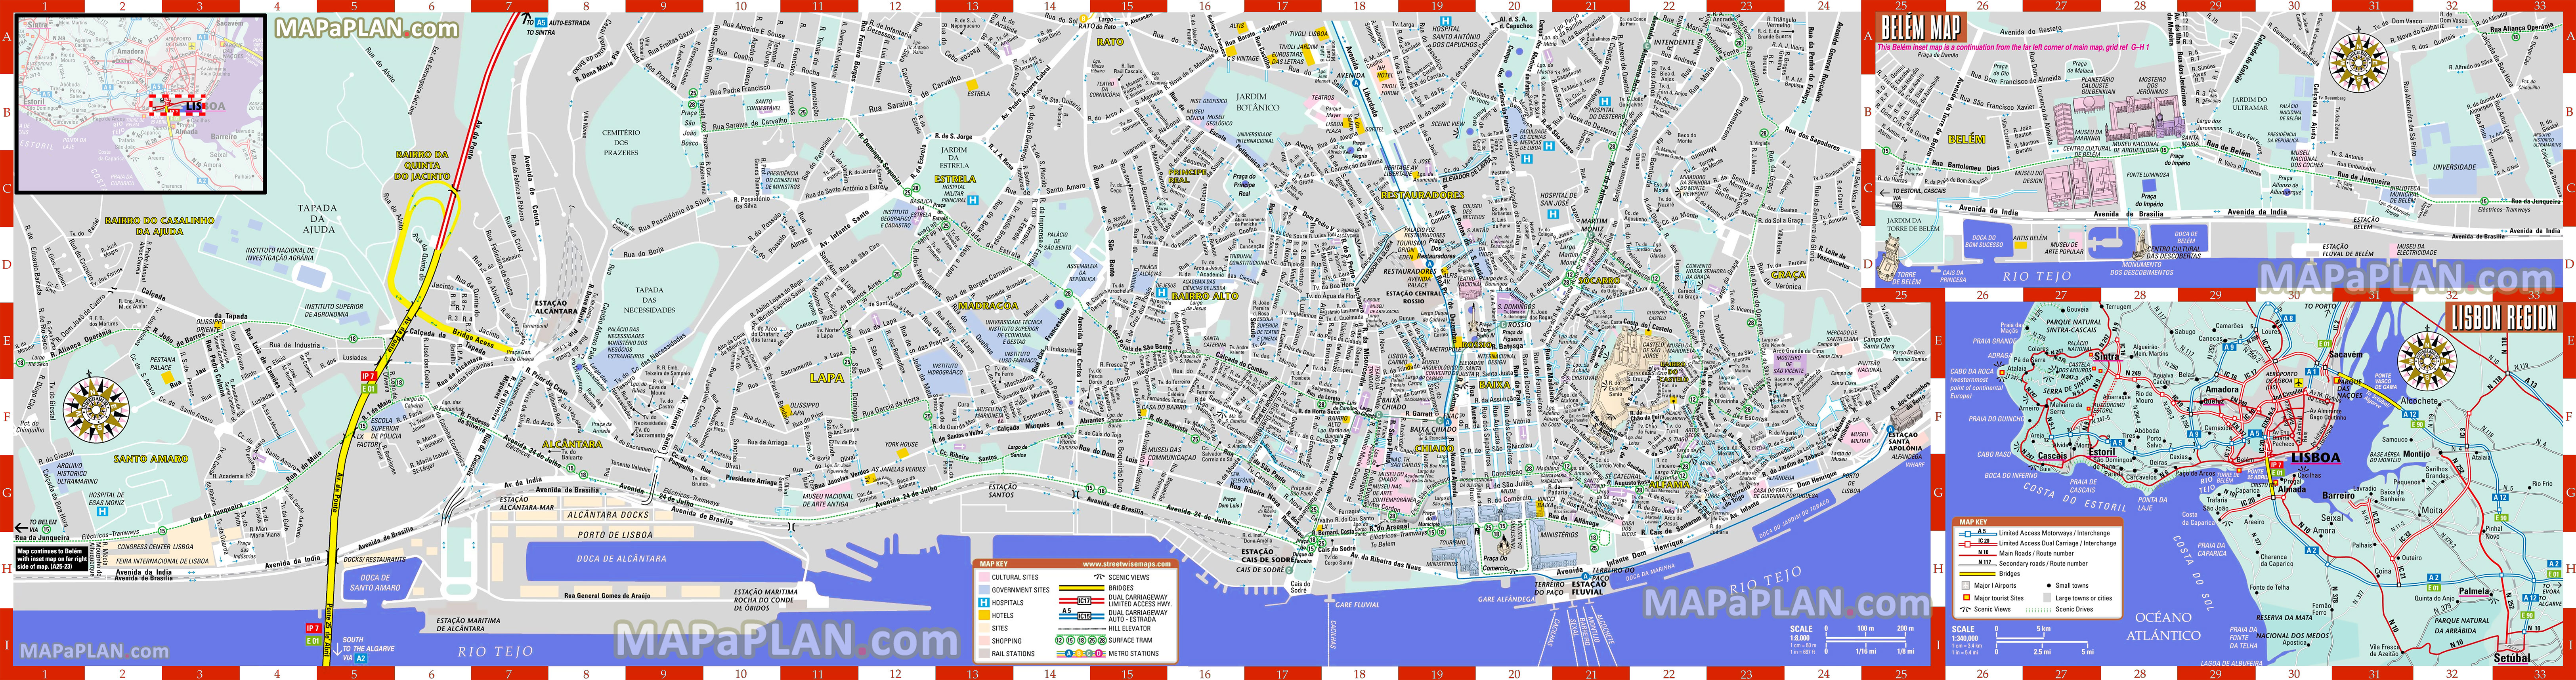 Lisbon maps - Top tourist attractions - Free, printable city street map